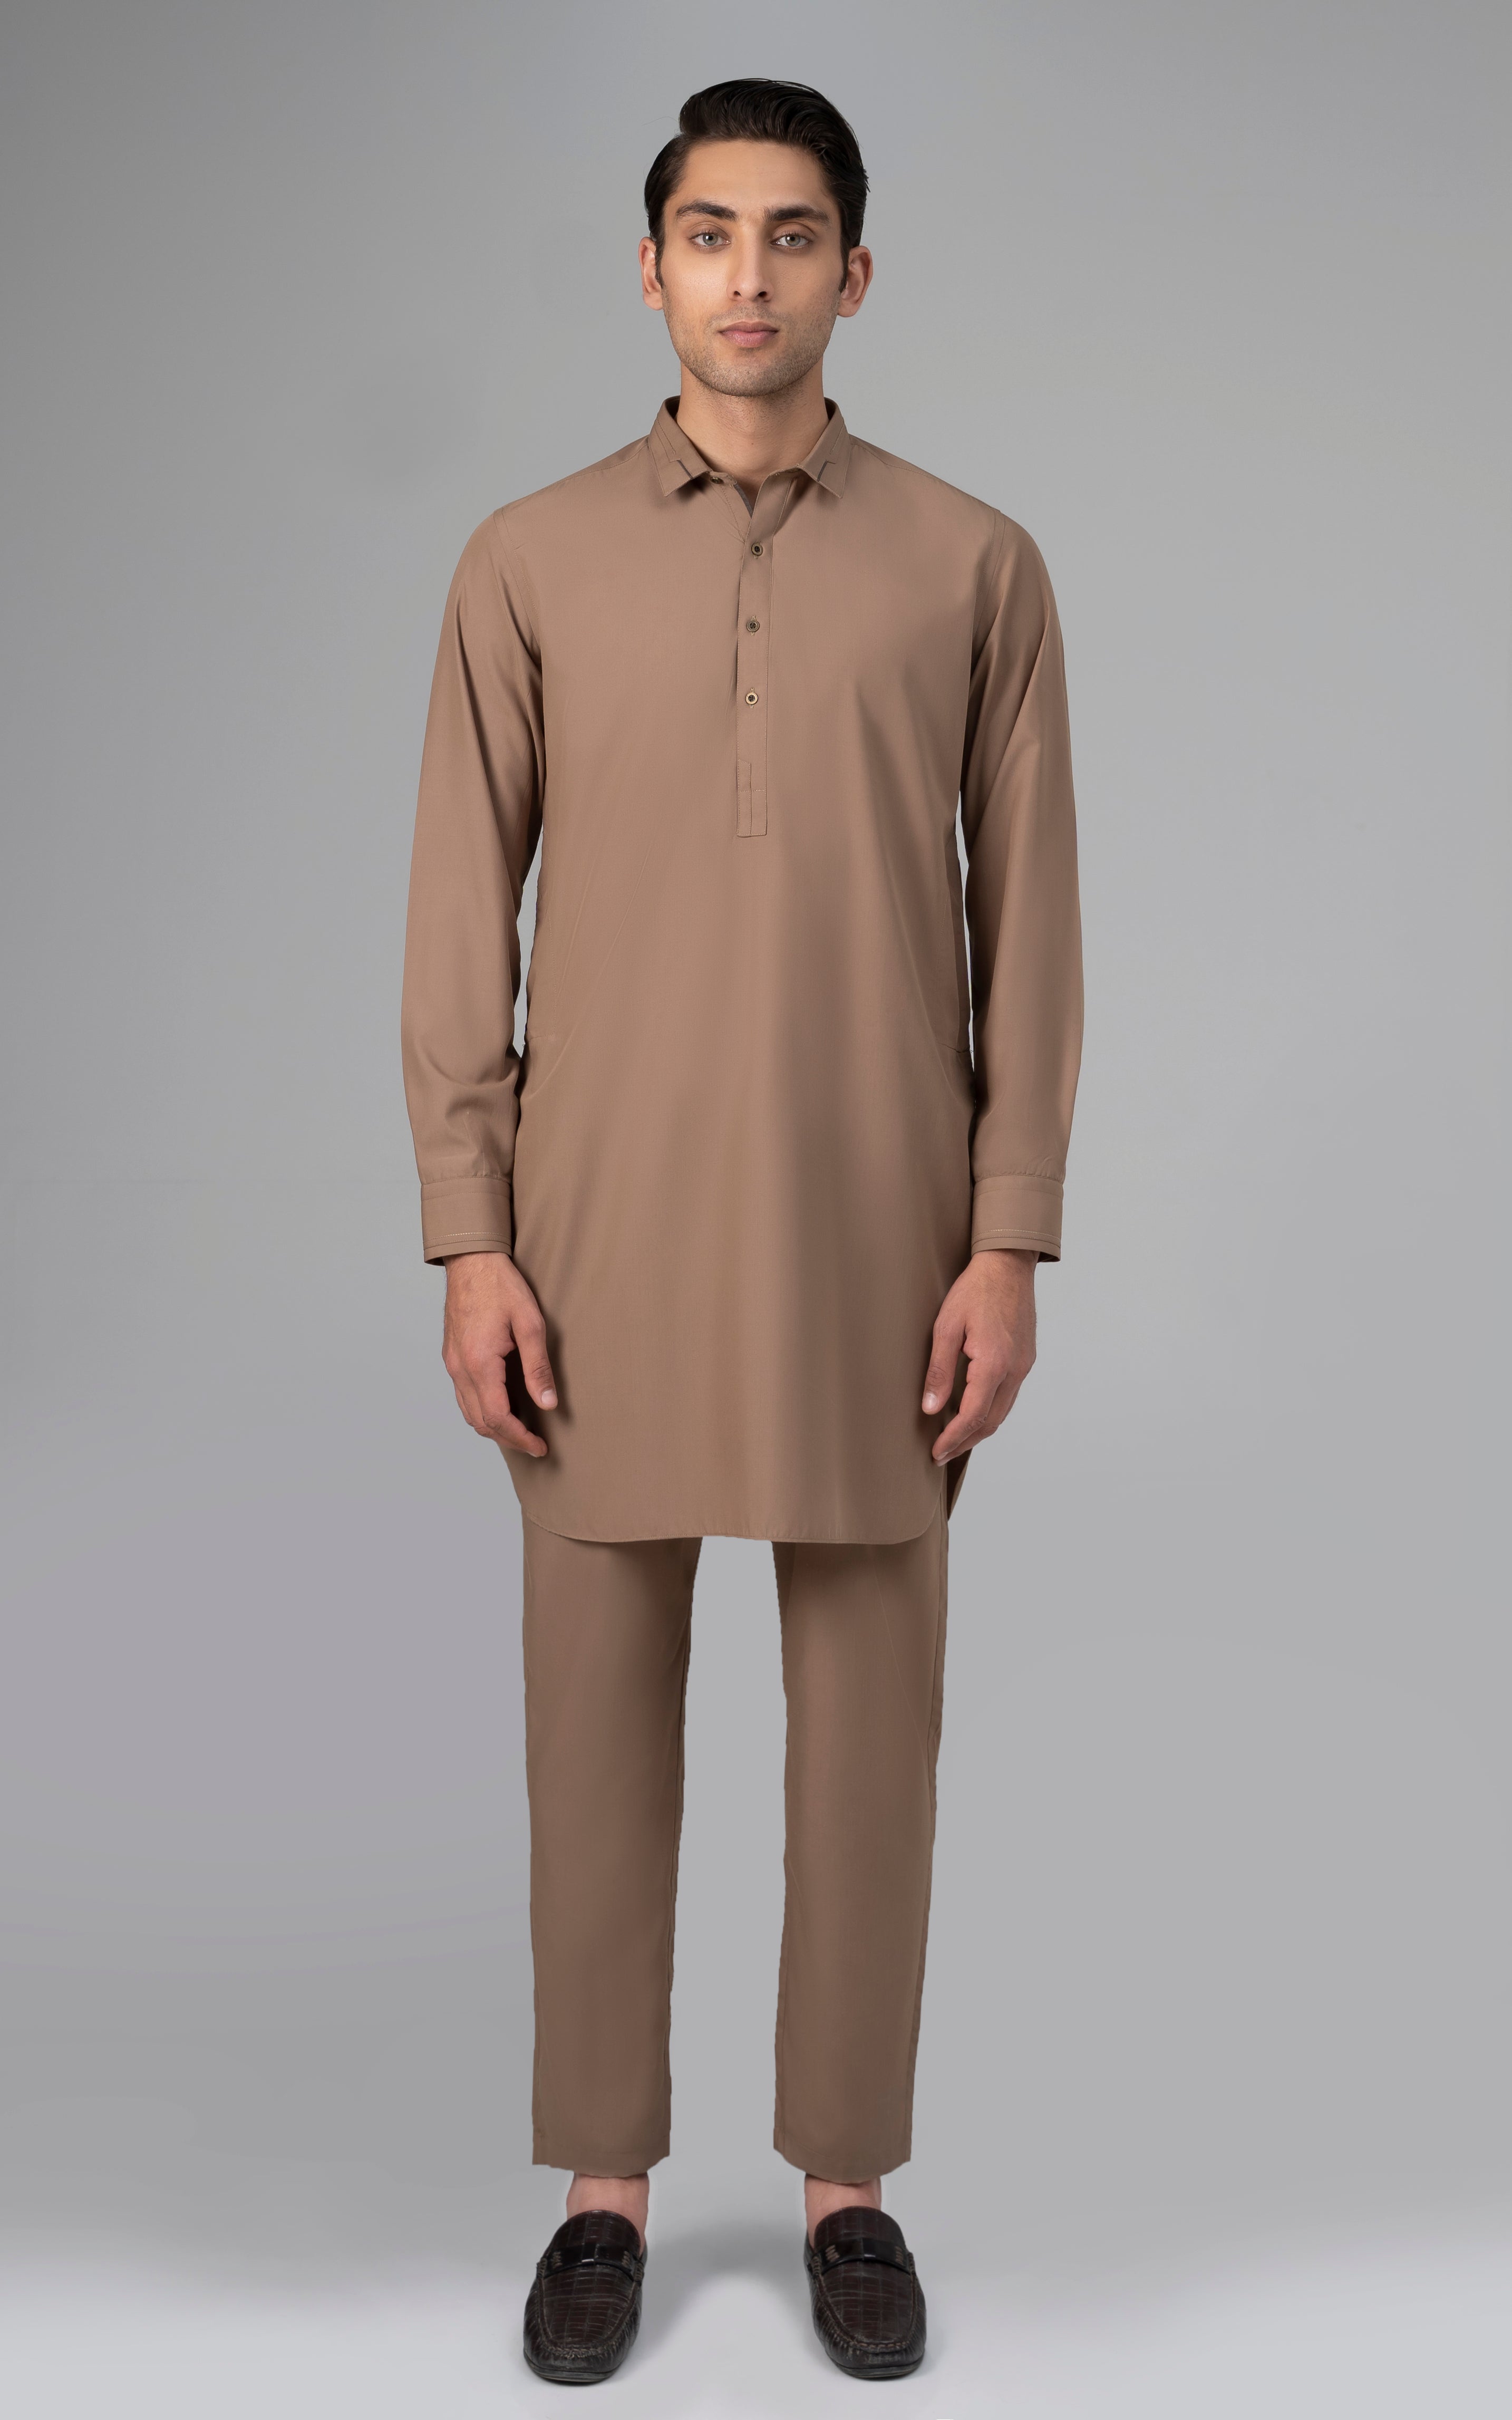 BLENDED WASH & WEAR - CLASSIC COLLECTION KHAKI